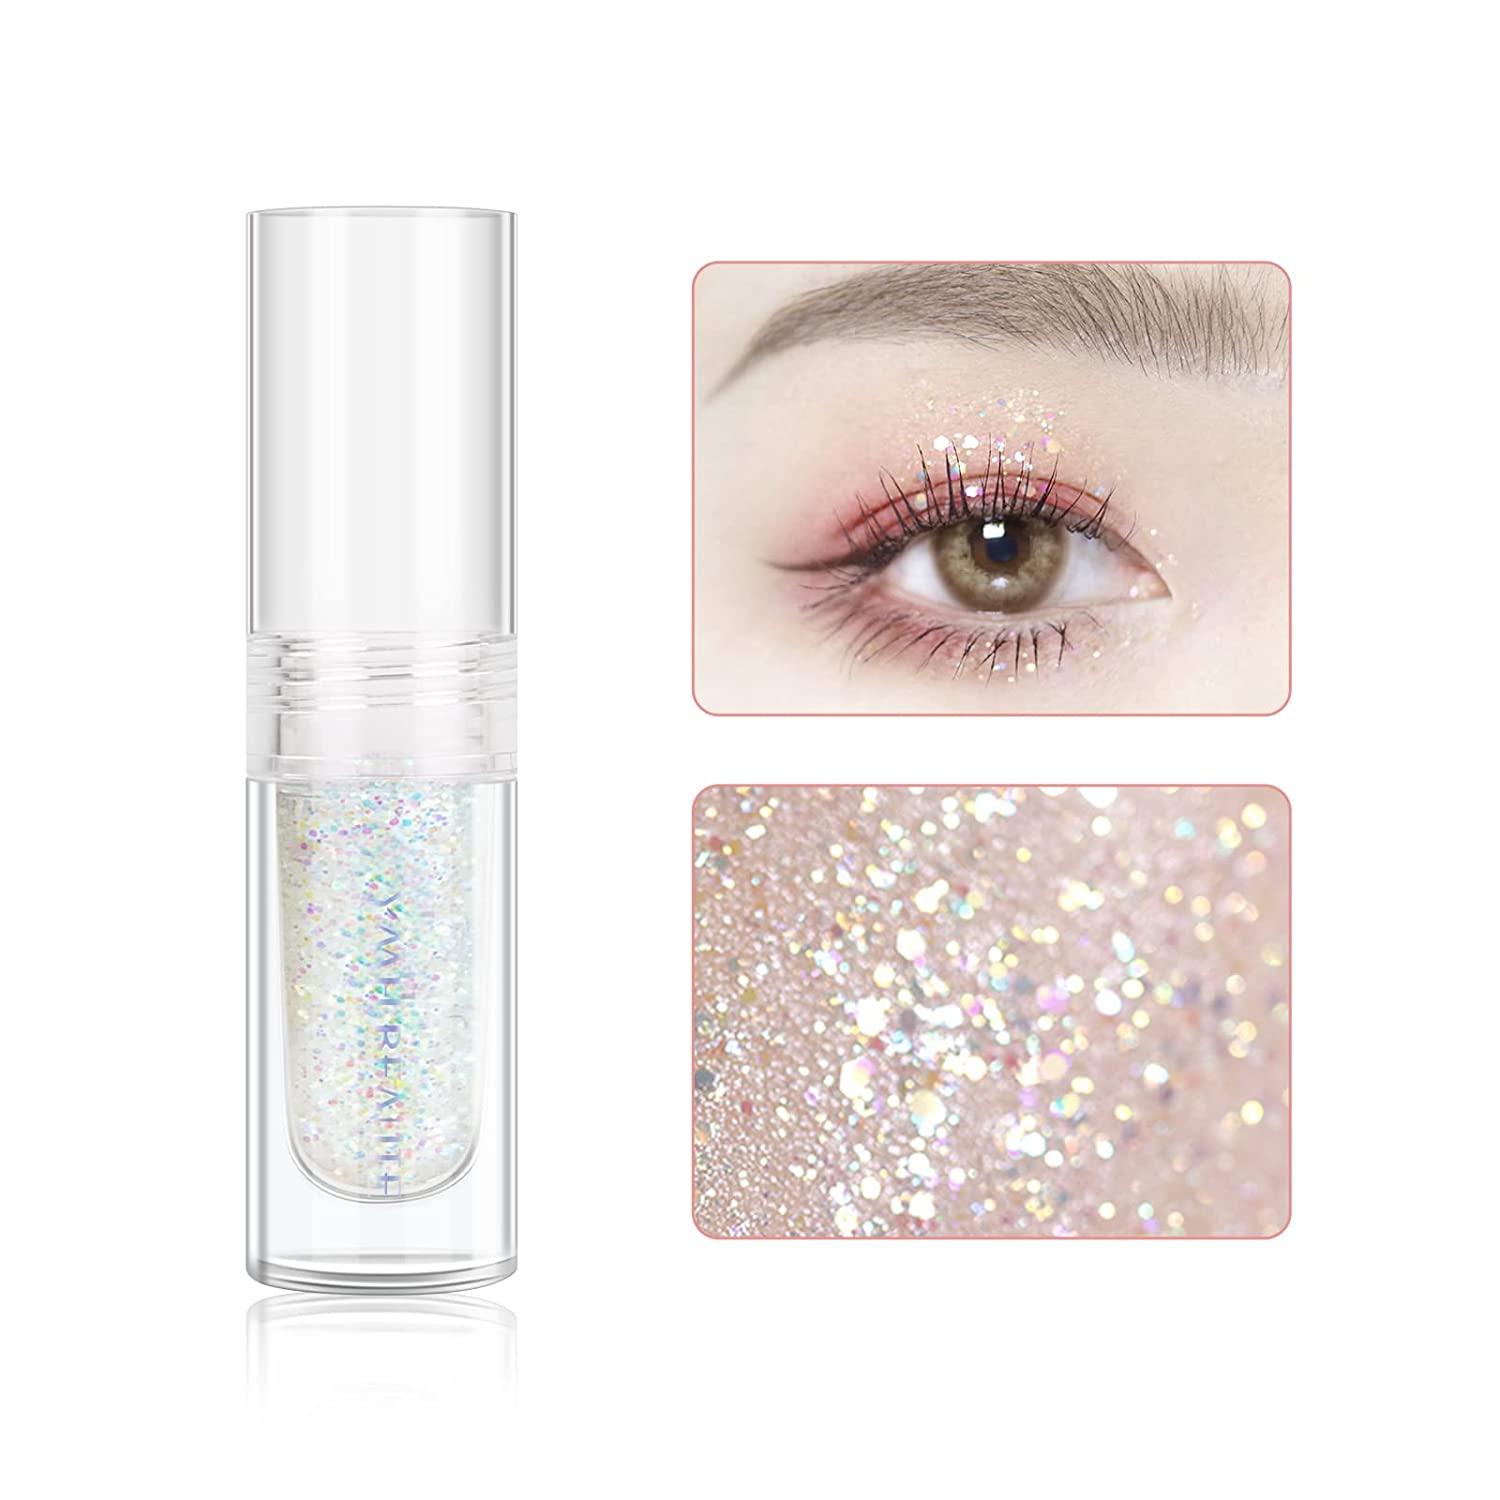 YMH BEAUTE Liquid Glitter Eyeshadow Pigmented Lasting Quick Drying Easy to Loose Glitter Glue for Crystals Makeup (Transparent Flashing Colorful Sequins 01) 01 Transparent Flashing Sequins